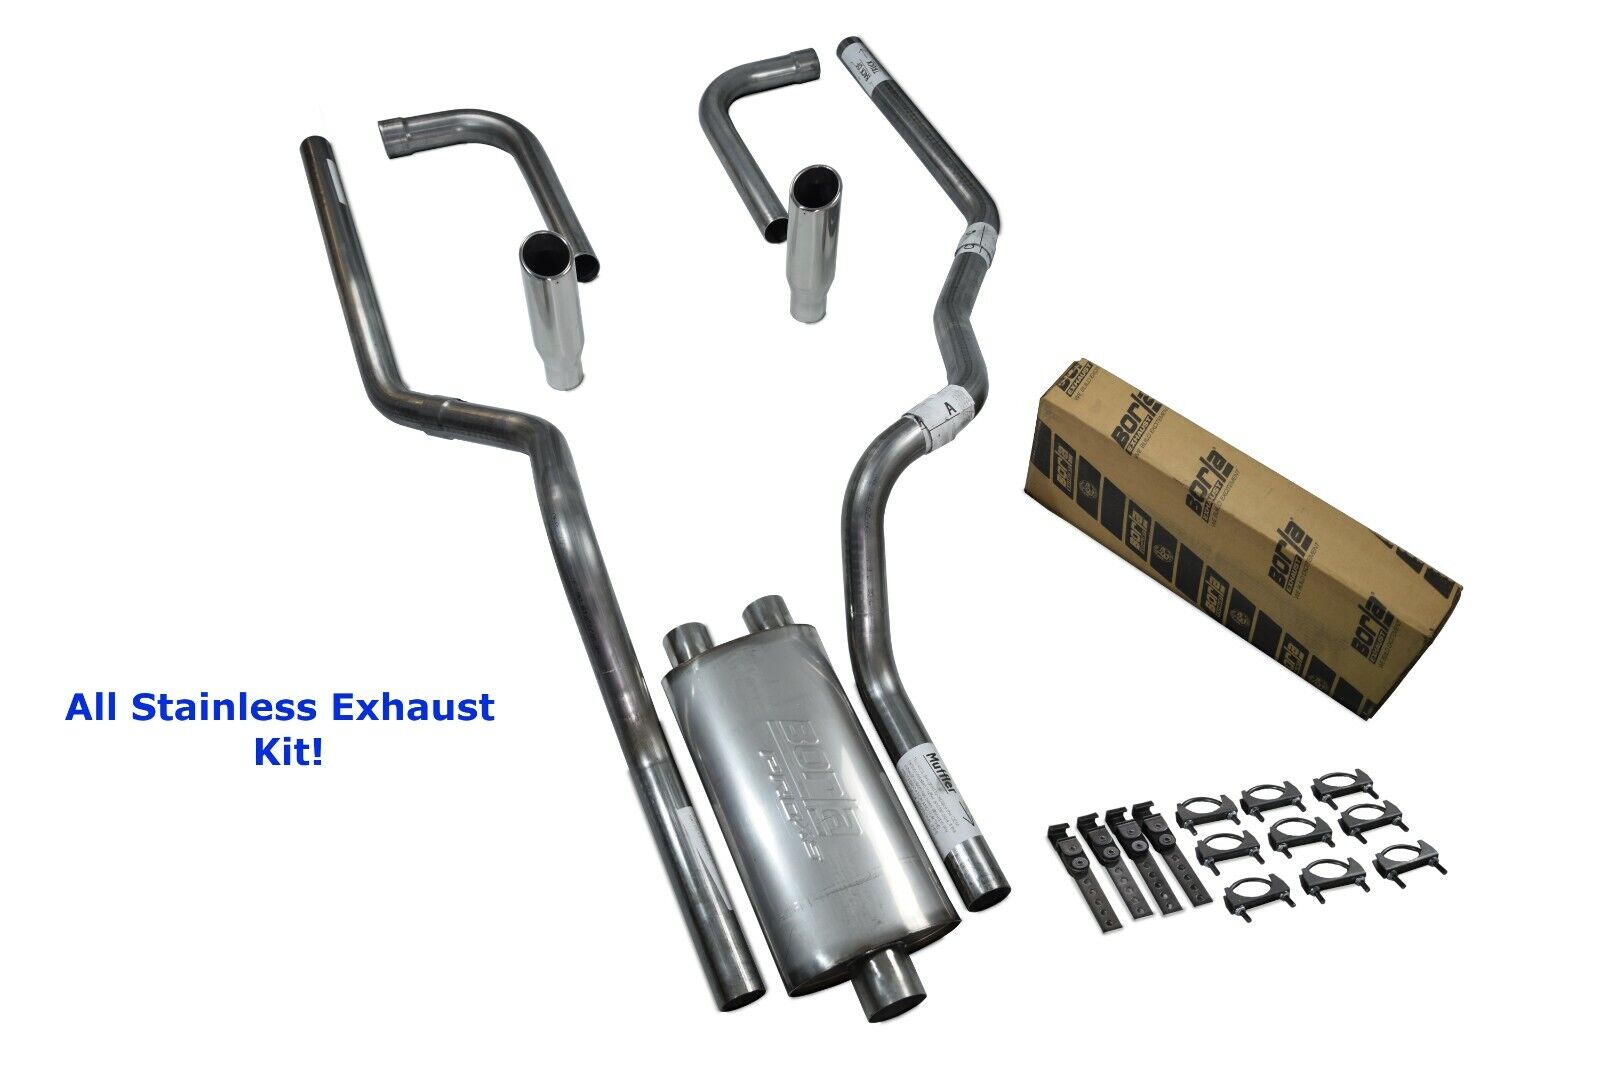 All-Stainless Dual Exhaust Kit Chevy GMC 1500 07-14 Borla Pro XS Side Rolled Tip